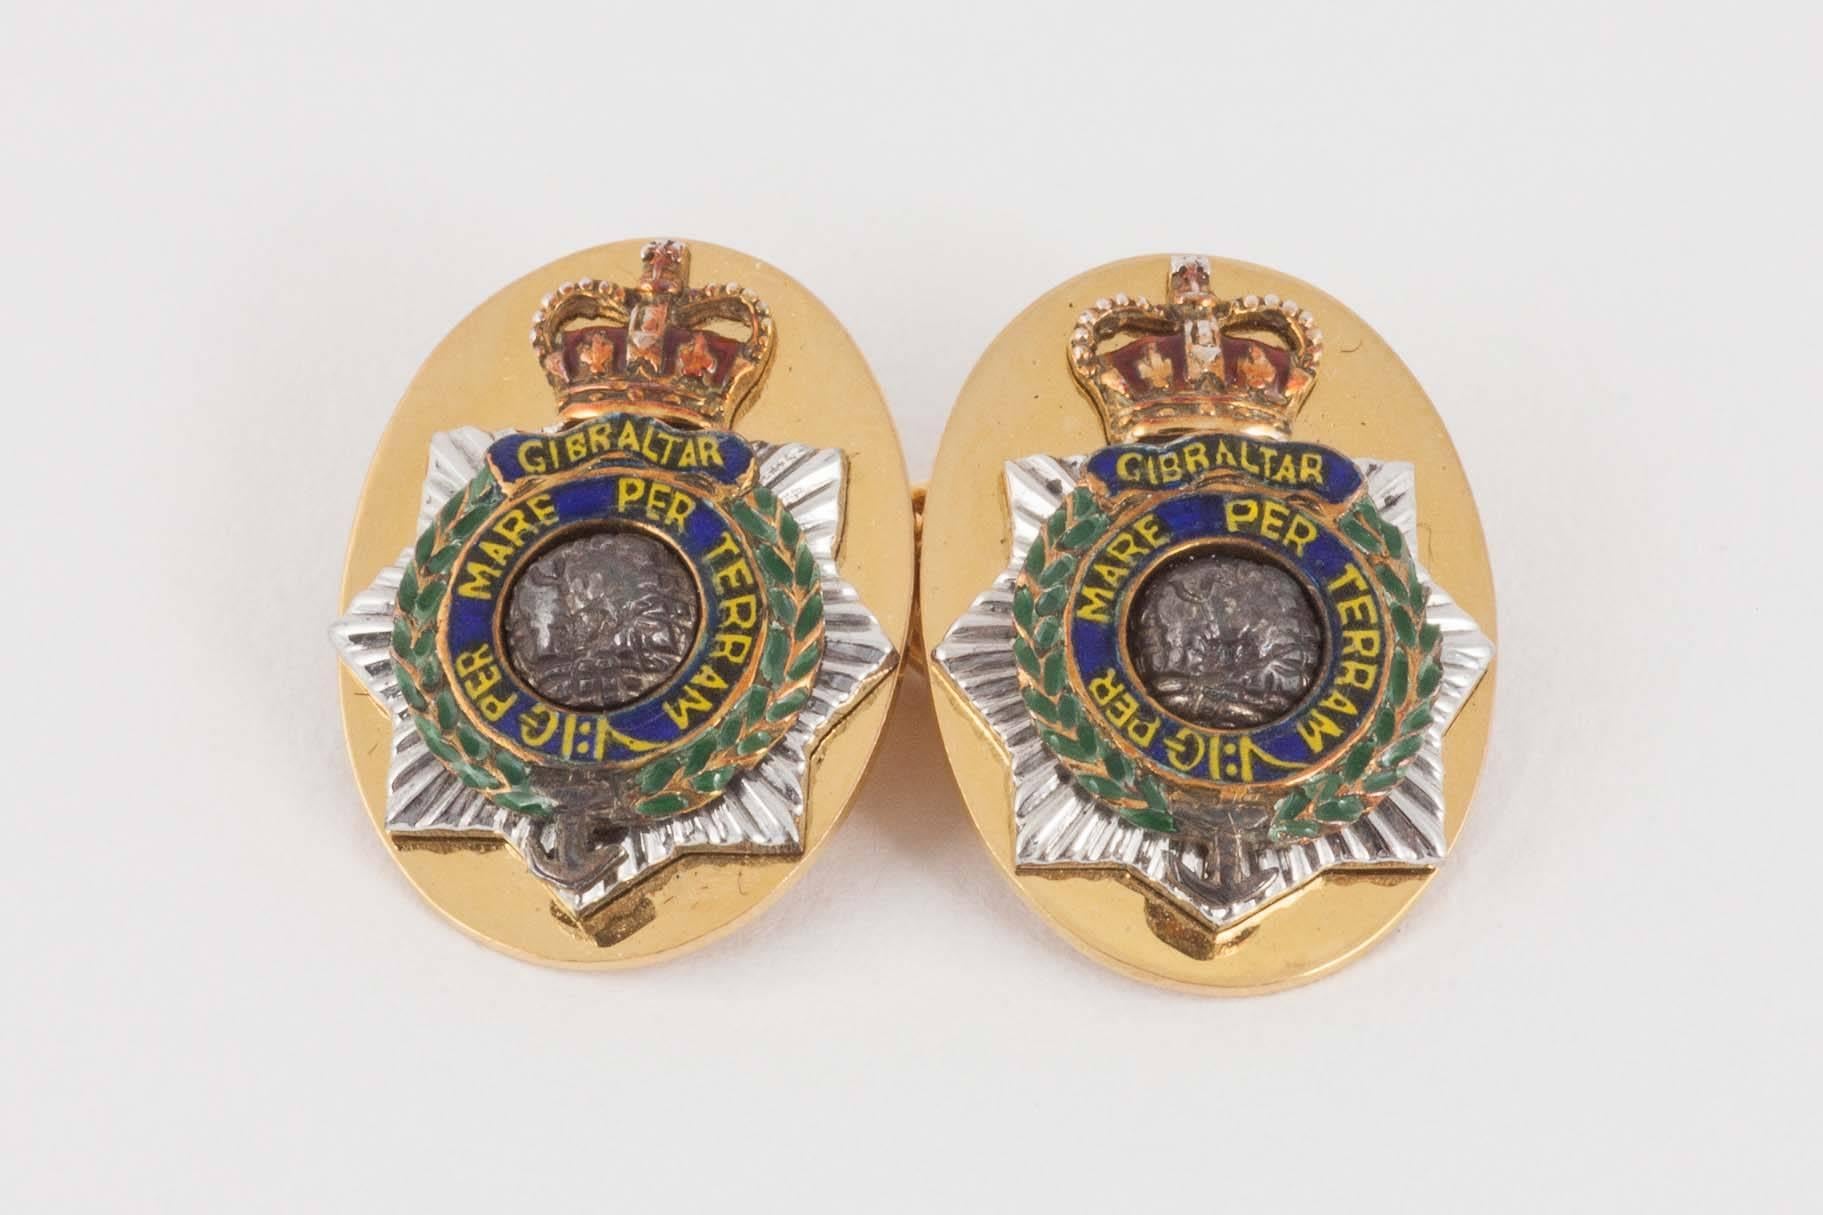 A good quality pair of 9ct yellow gold cufflinks with applied badge of The Royal Marines in white gold and enamel,Gibraltar per mare per terram [by sea by land] . hallmarked for Birmingham 1975 with makers initials JWB.